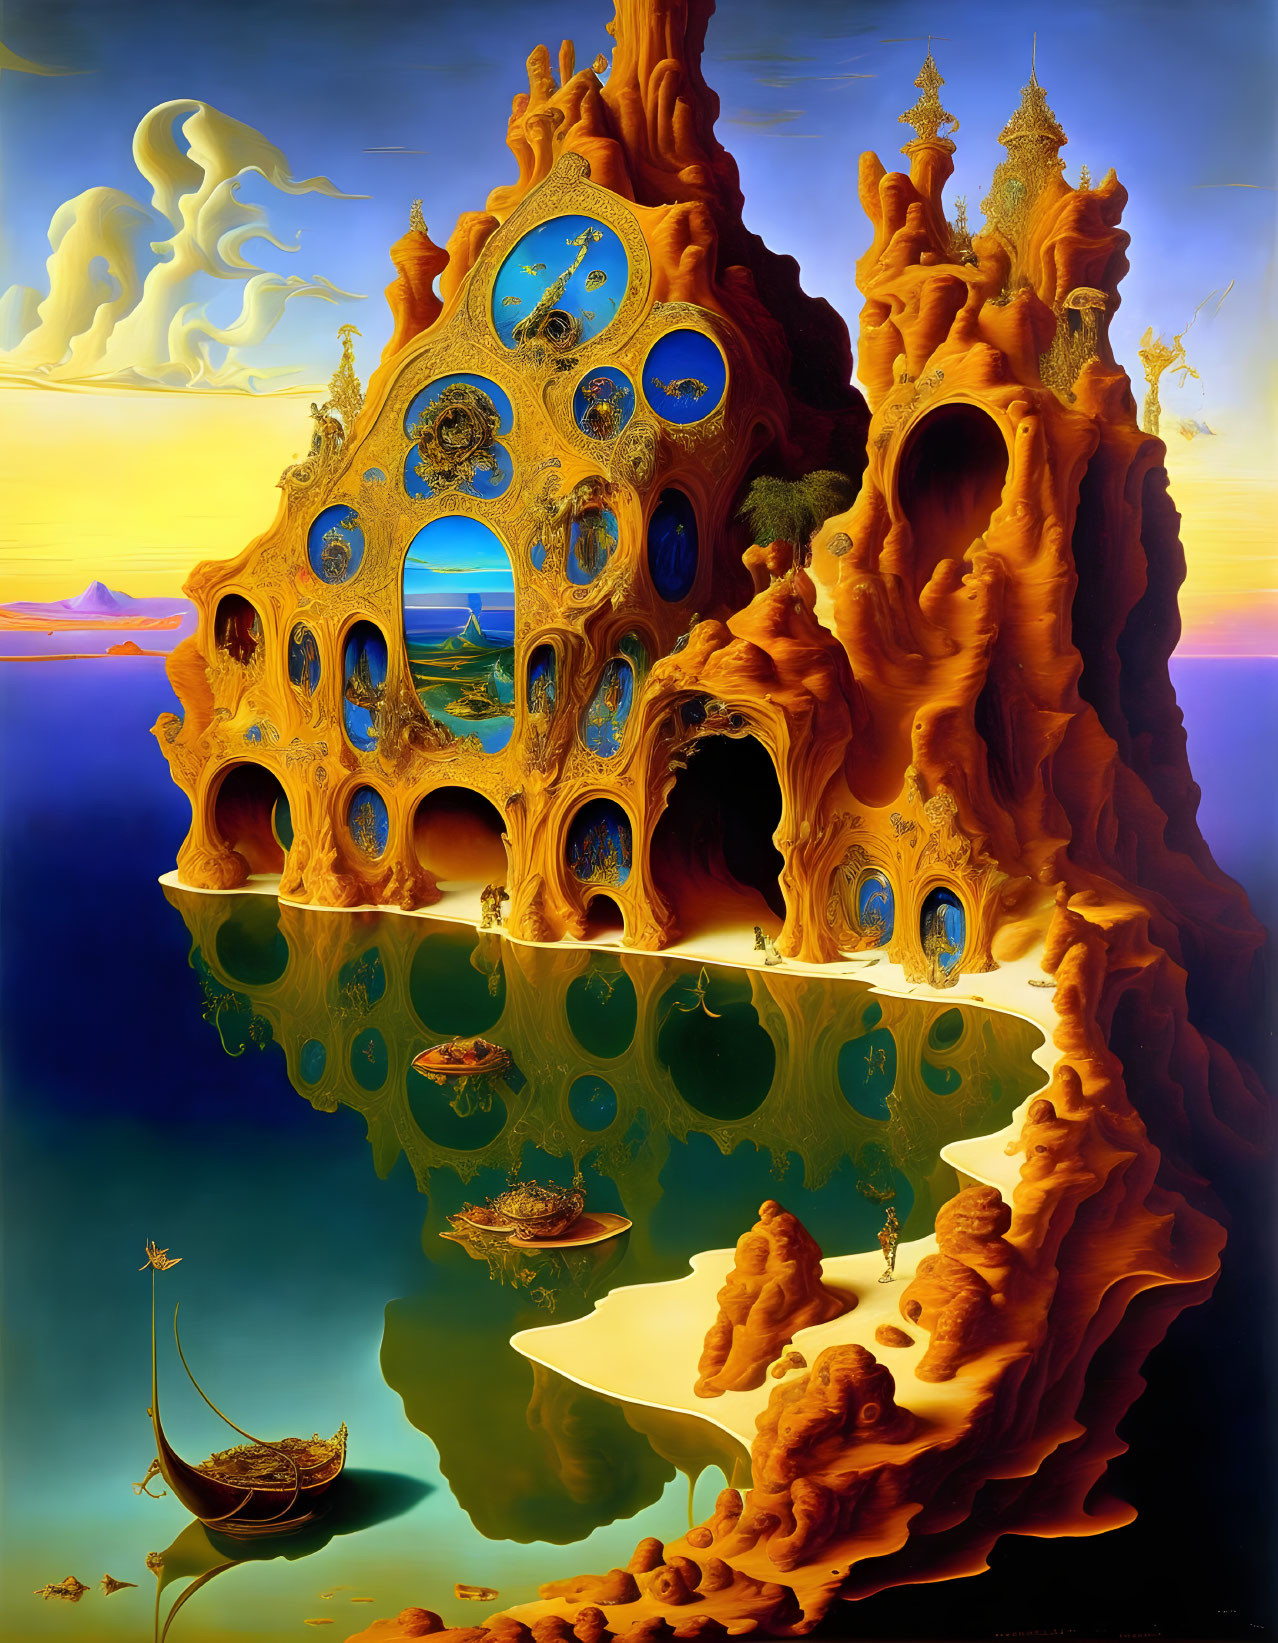 Surreal painting of golden structure with arches and clocks against skiescape